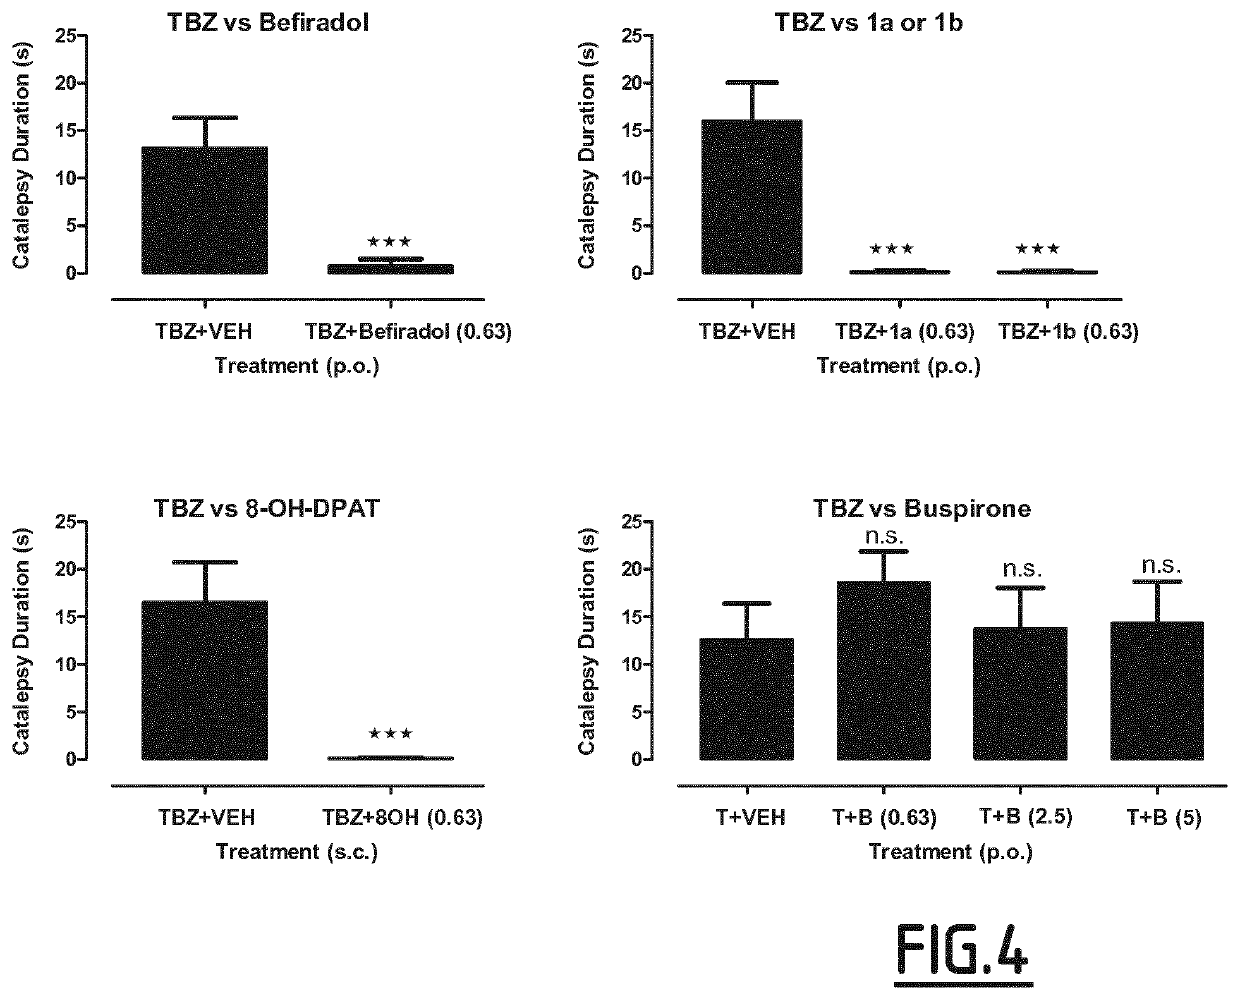 Use Of Selective Serotonin 5-HT1A Receptor Agonists For Treating Side-Effects Of VMAT Inhibitors